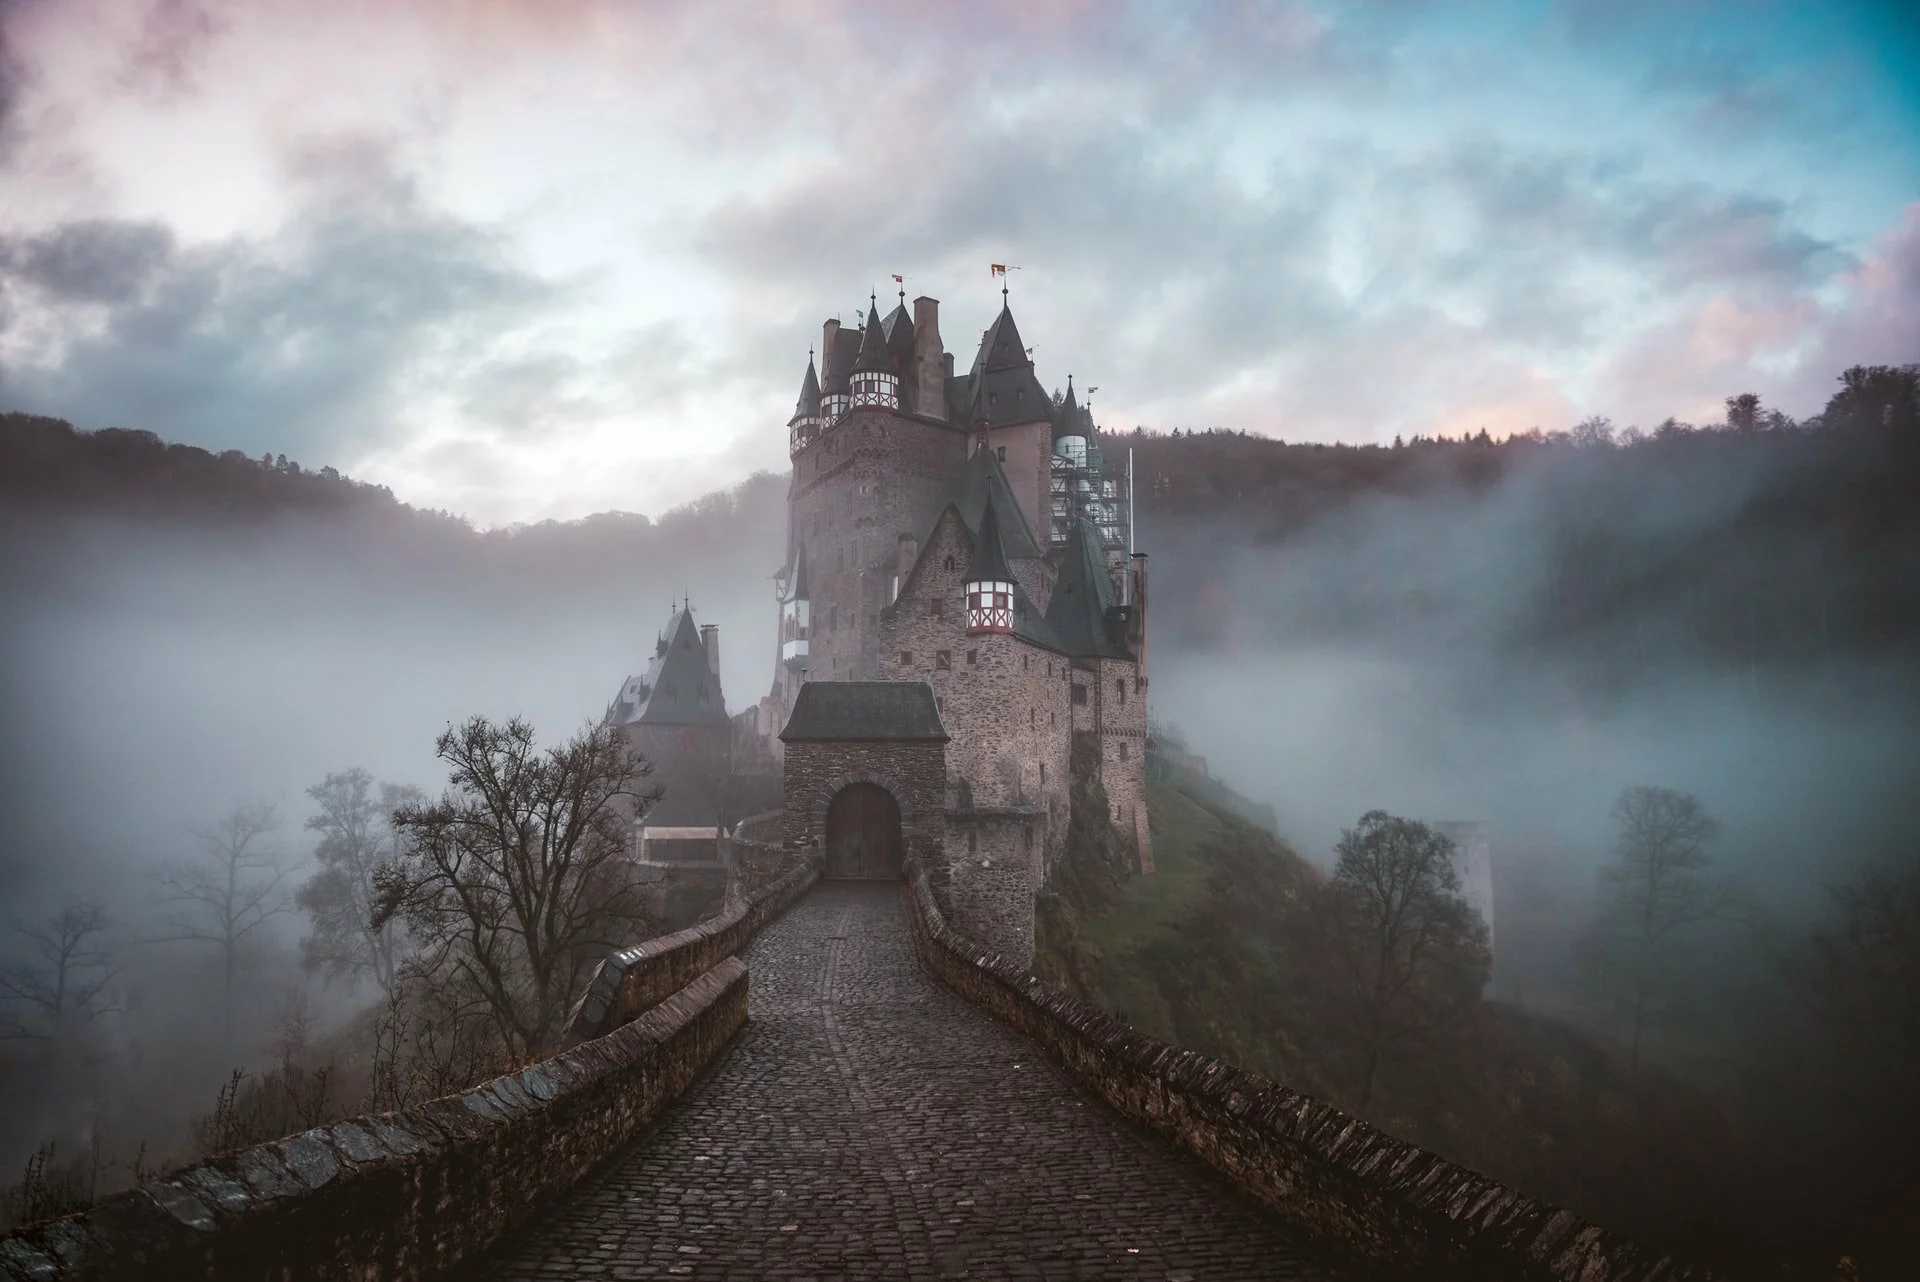 Dark German Folklore - Burg Eltz is haunted by the ghost of a warrior princess, Agnes